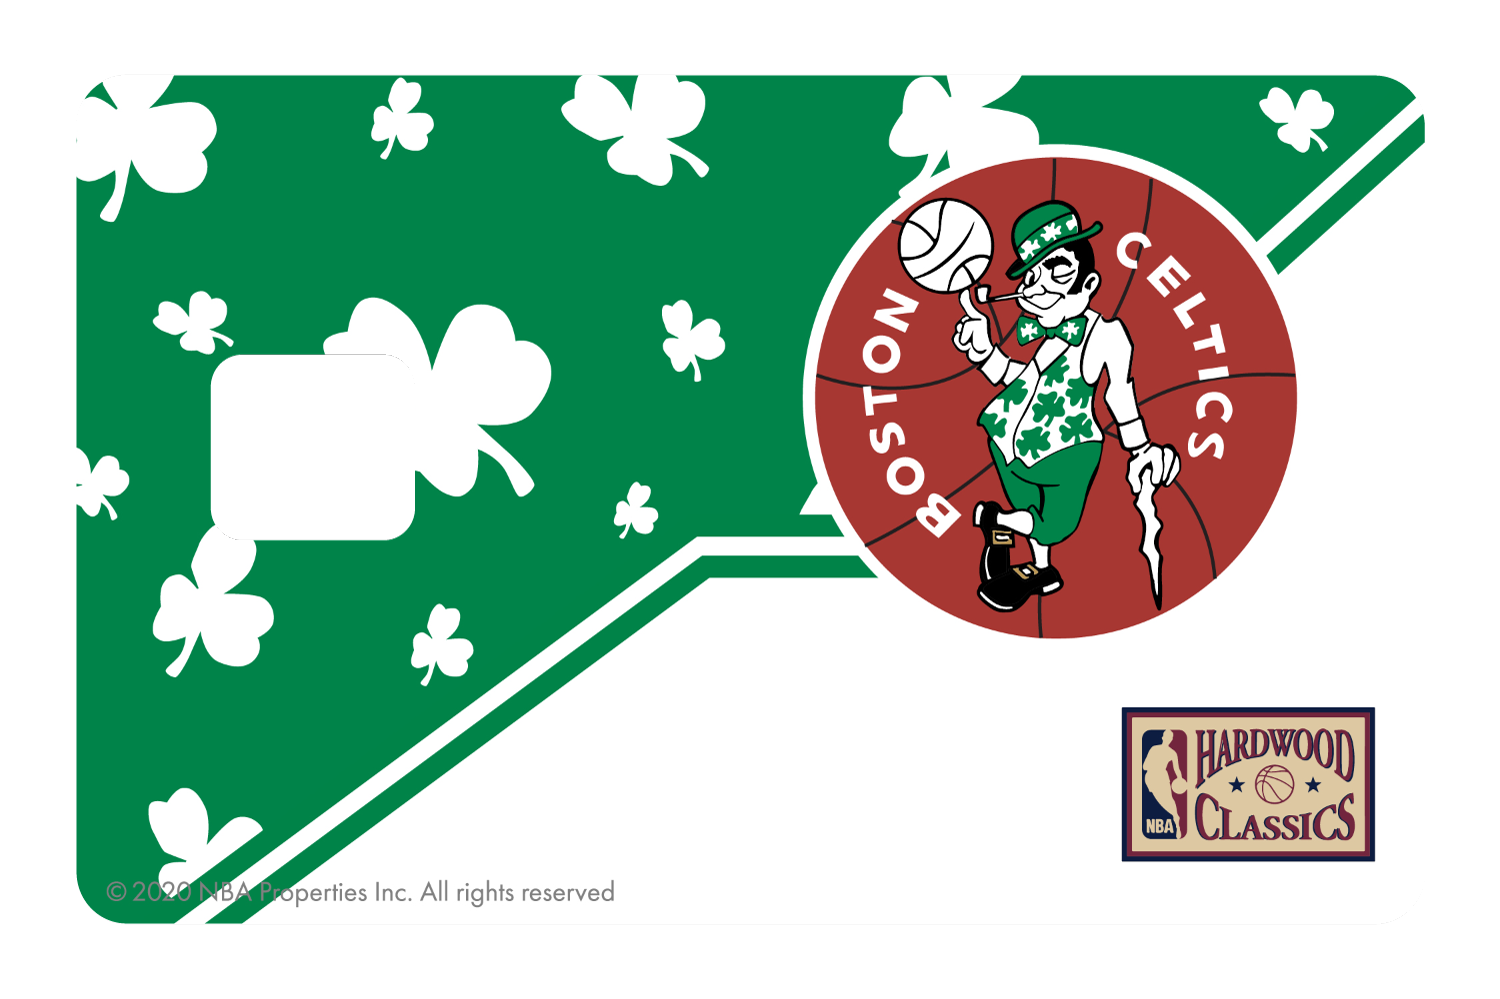 Credit Debit Card Skins | Cucu Covers - Customize Any Bank Card - Boston Celtics: Throwback Hardwood Classics, Full Cover / No Chip